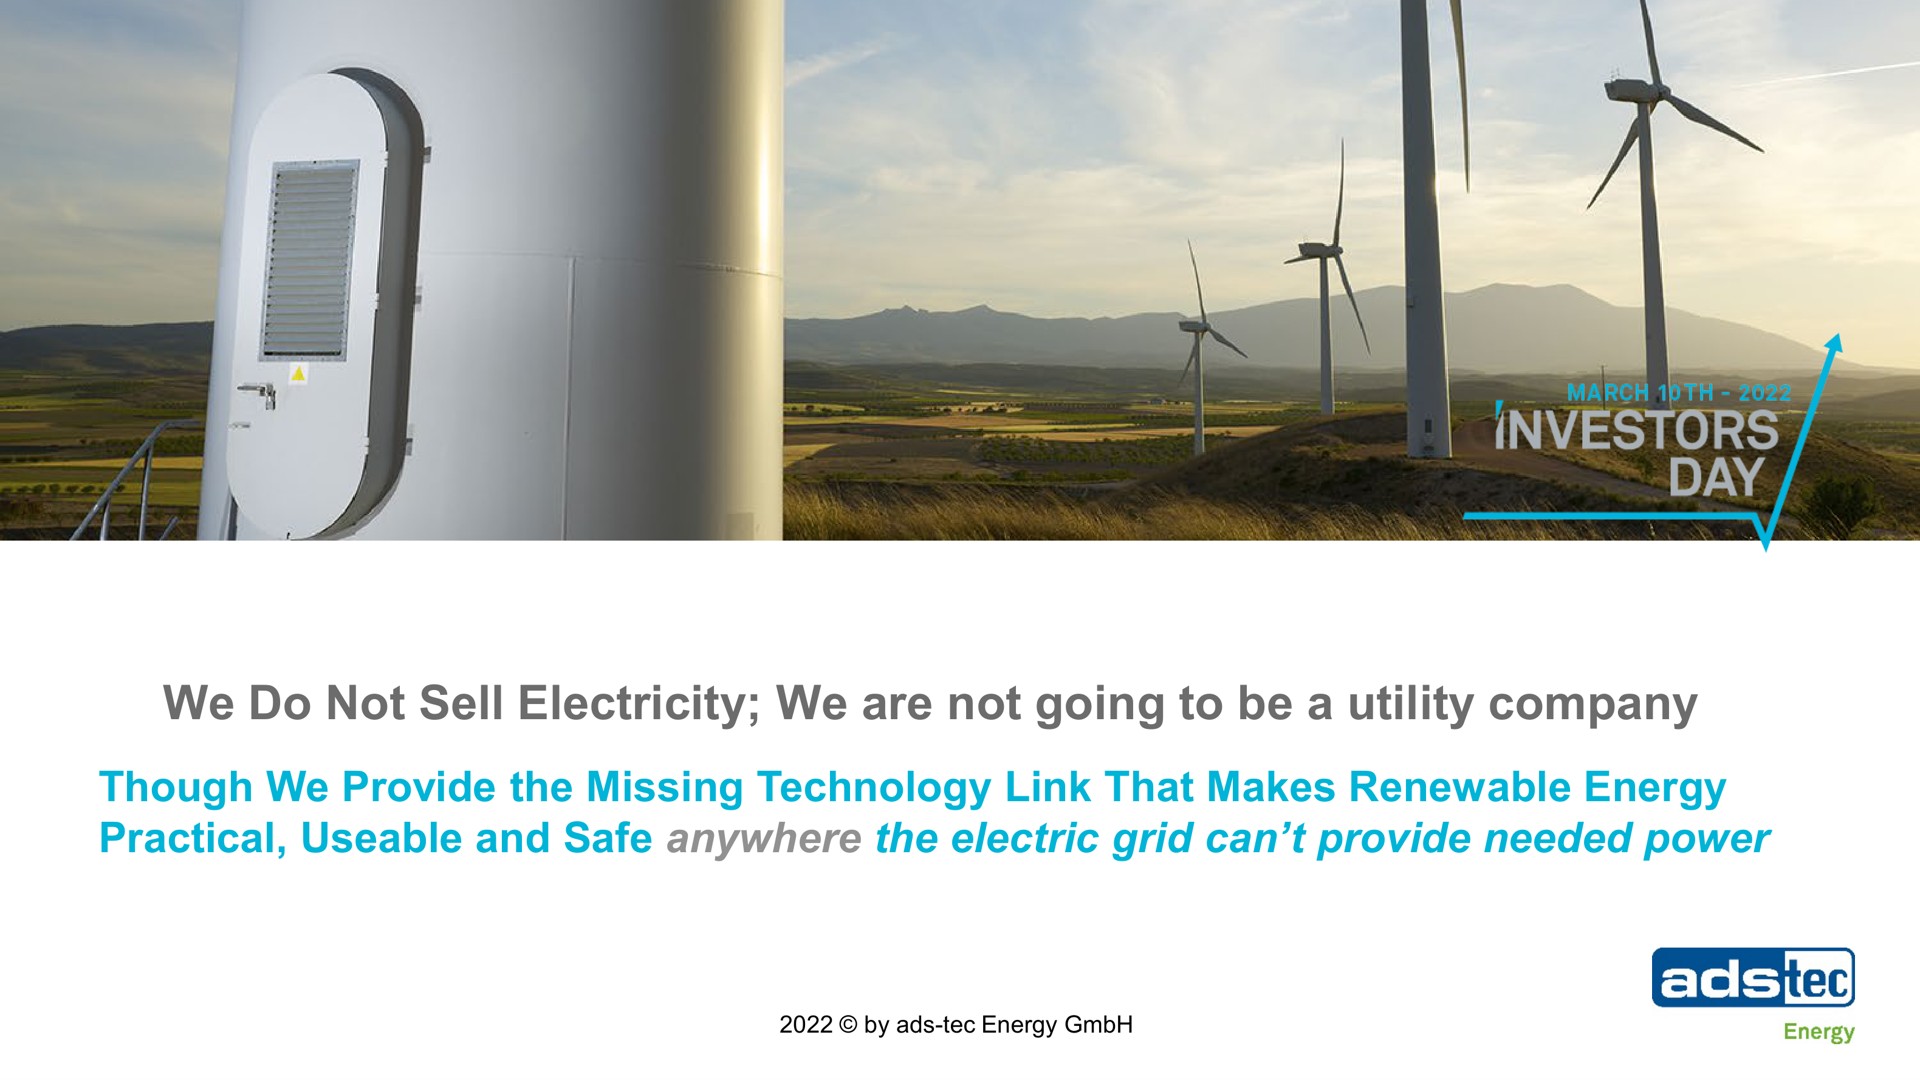 we do not sell electricity we are not going to be a utility company though we provide the missing technology link that makes renewable energy practical and safe anywhere the electric grid can provide needed power investors day | ads-tec Energy